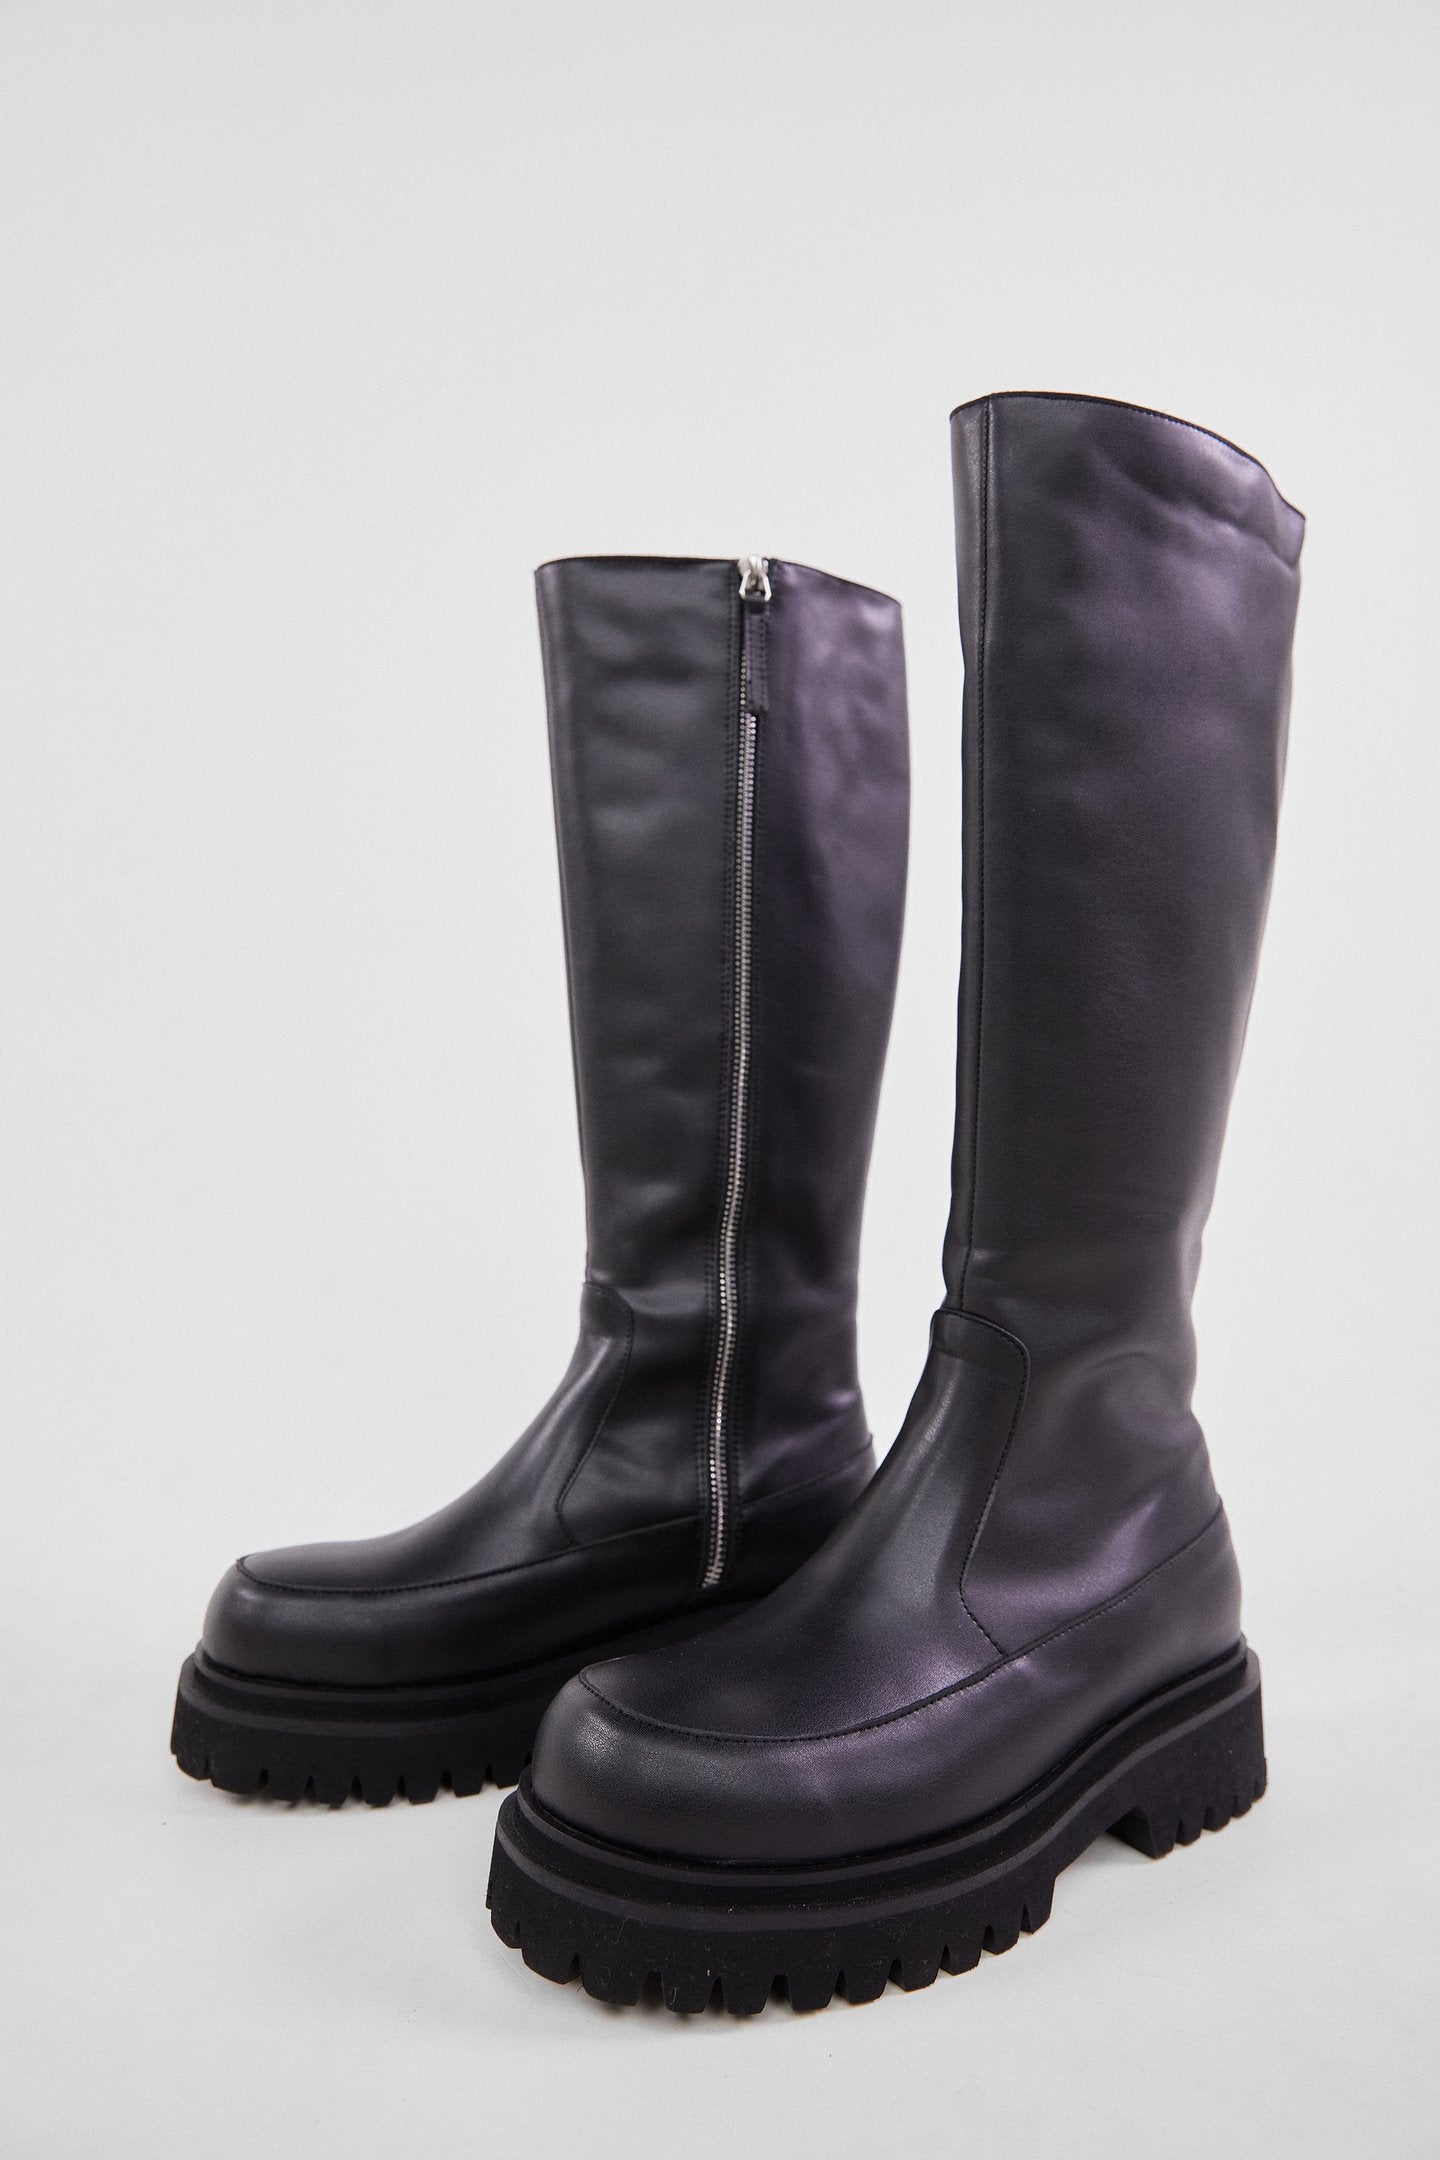 tall lug soled boots